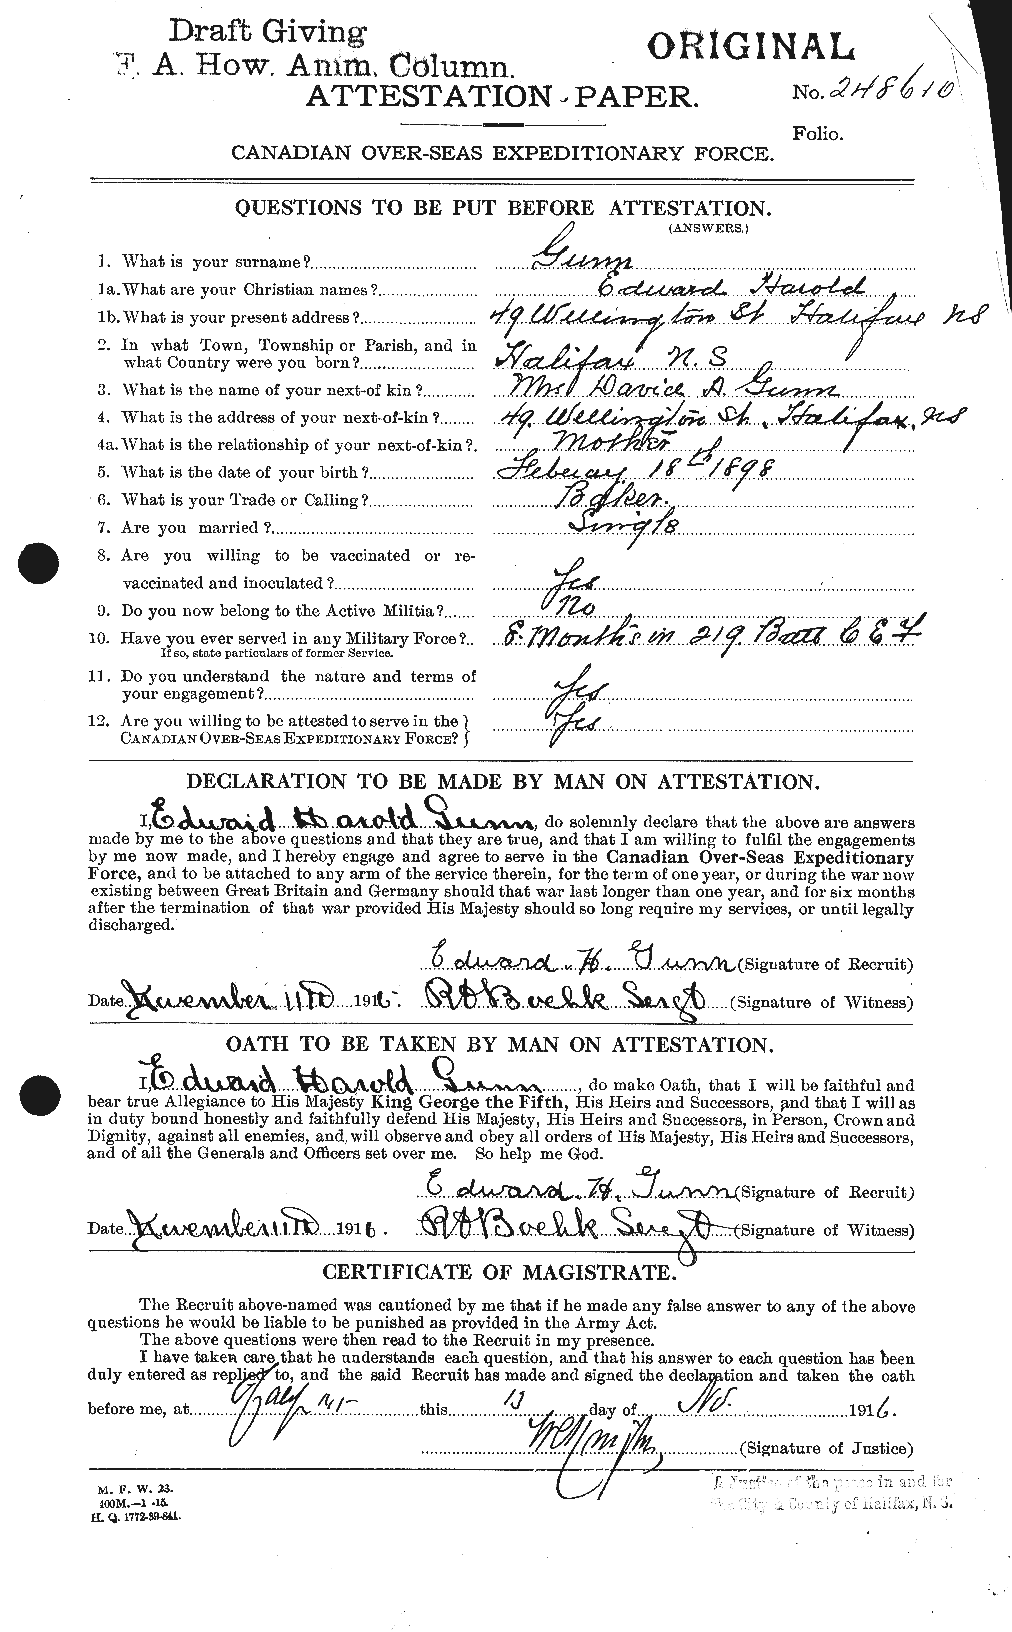 Personnel Records of the First World War - CEF 368035a